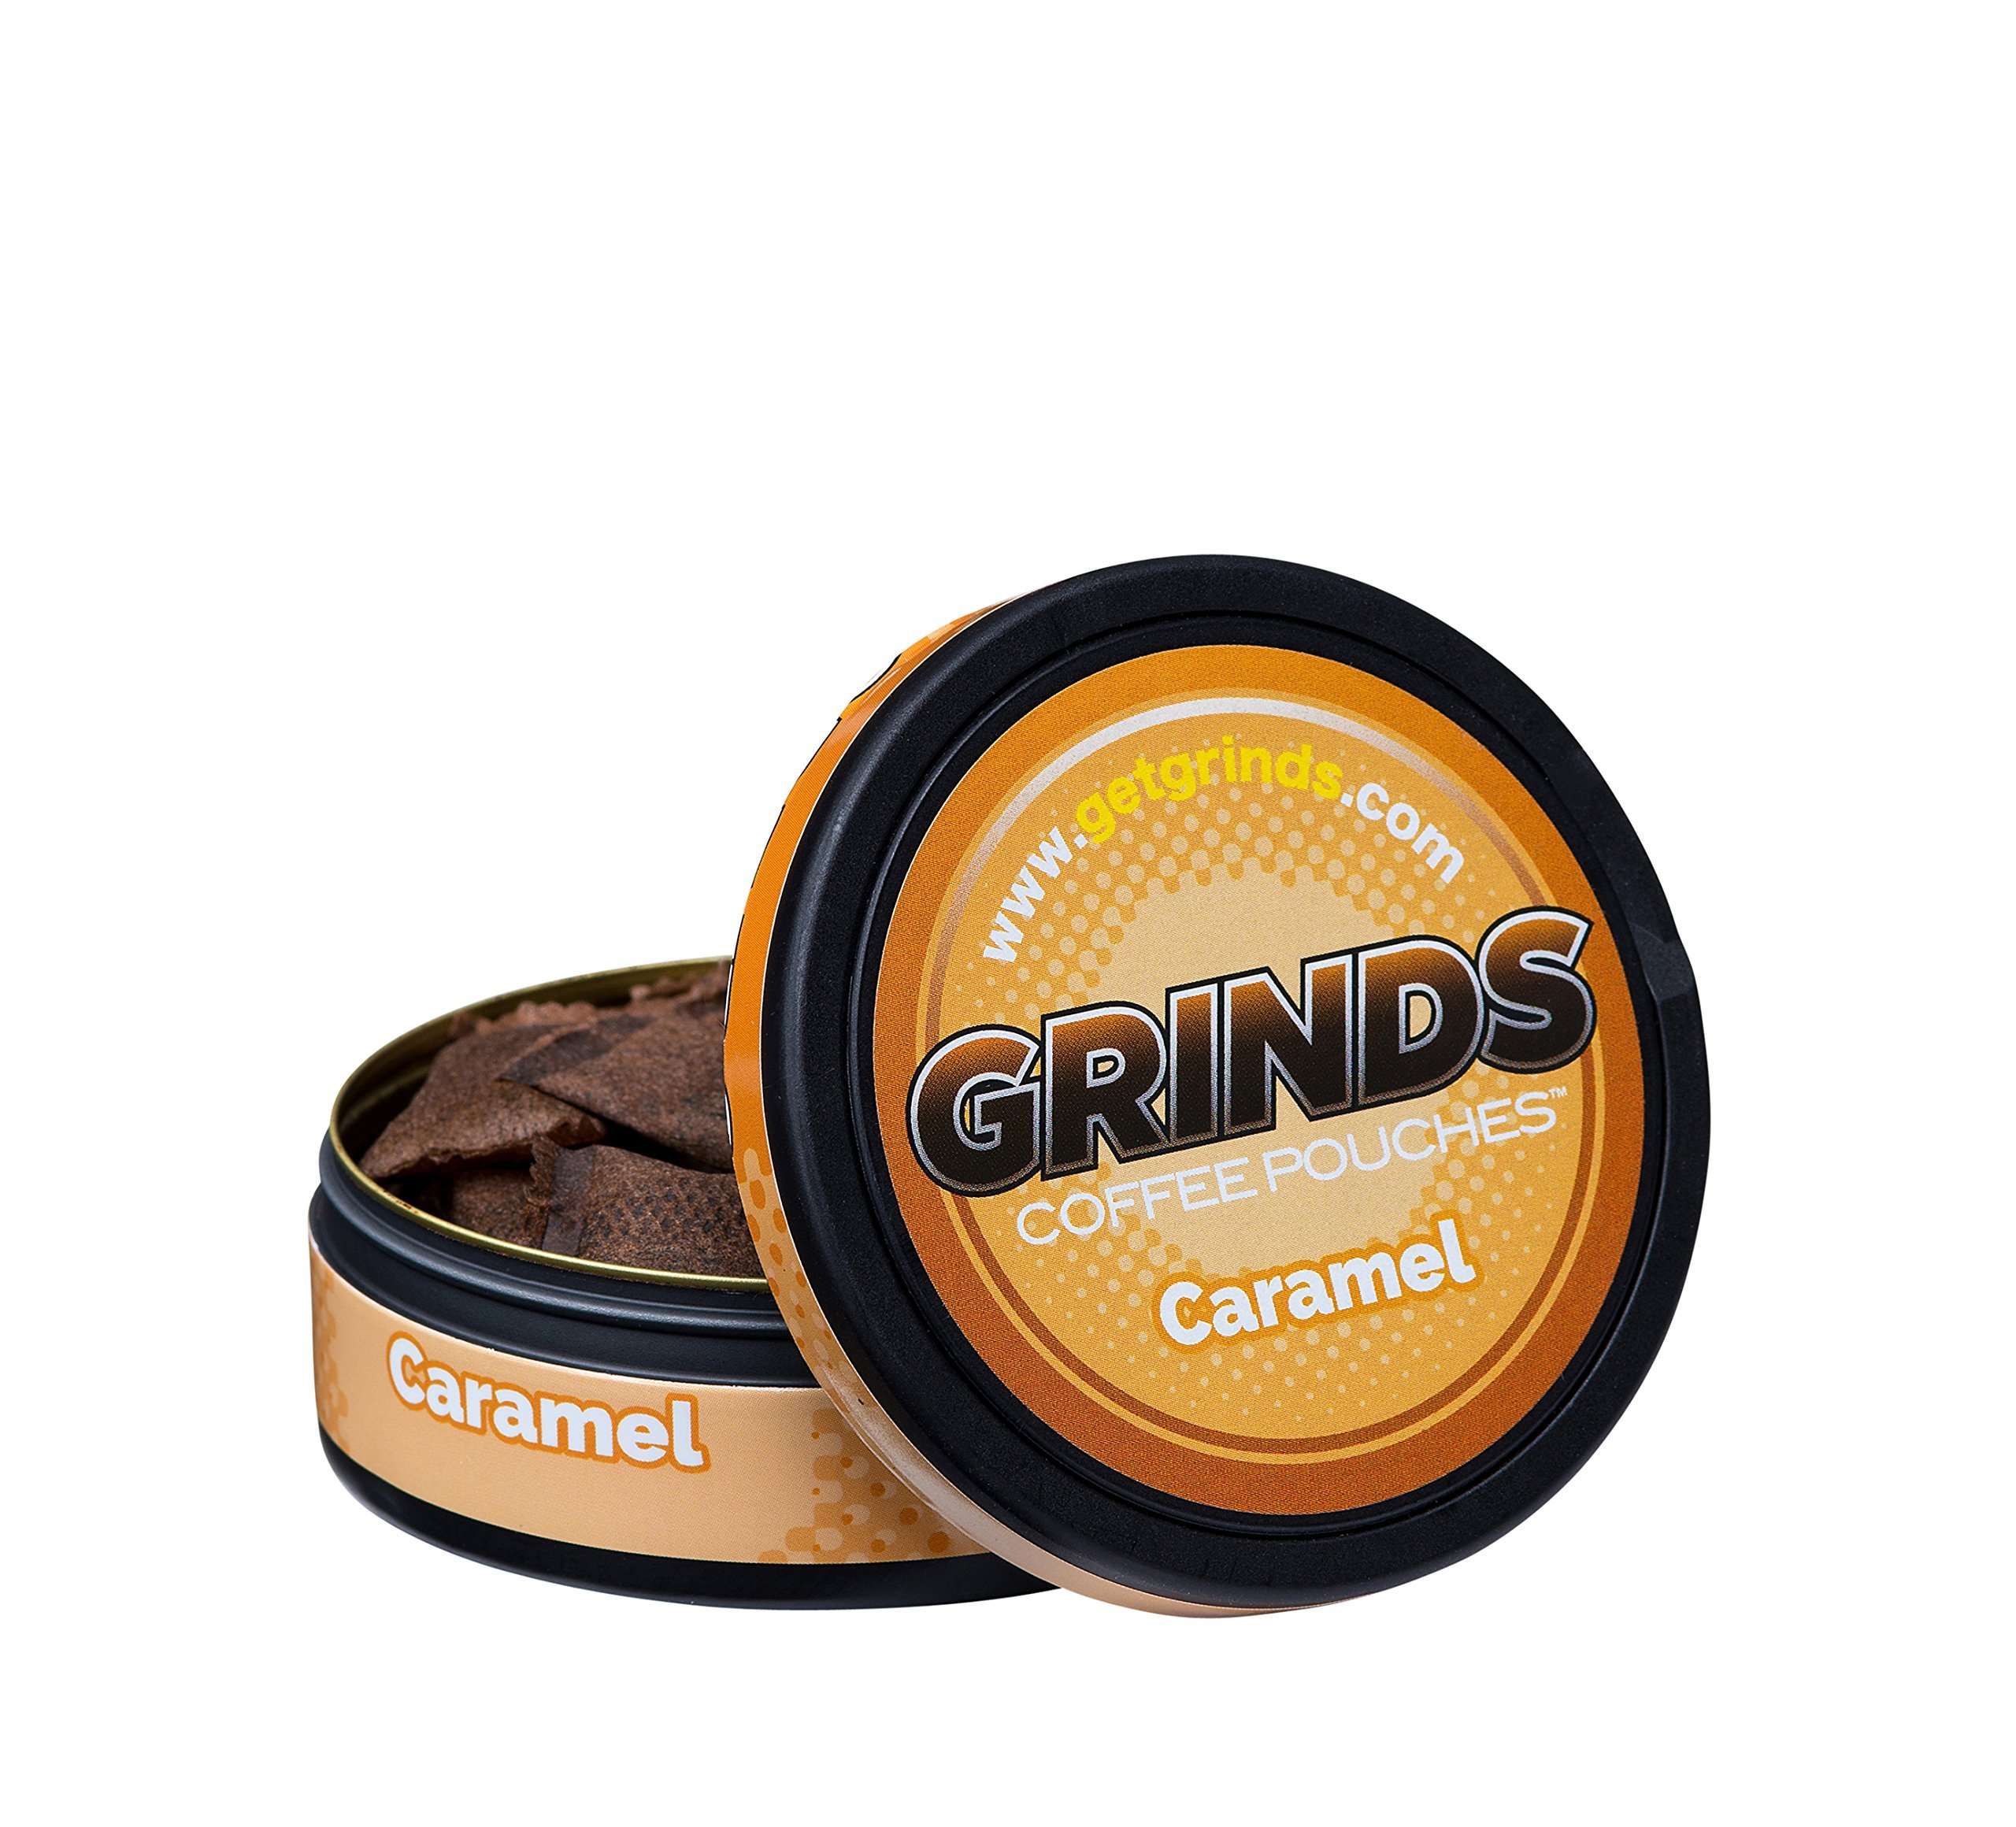 Grinds Coffee Pouches Review : Grinds Wintergreen (Coffee ...